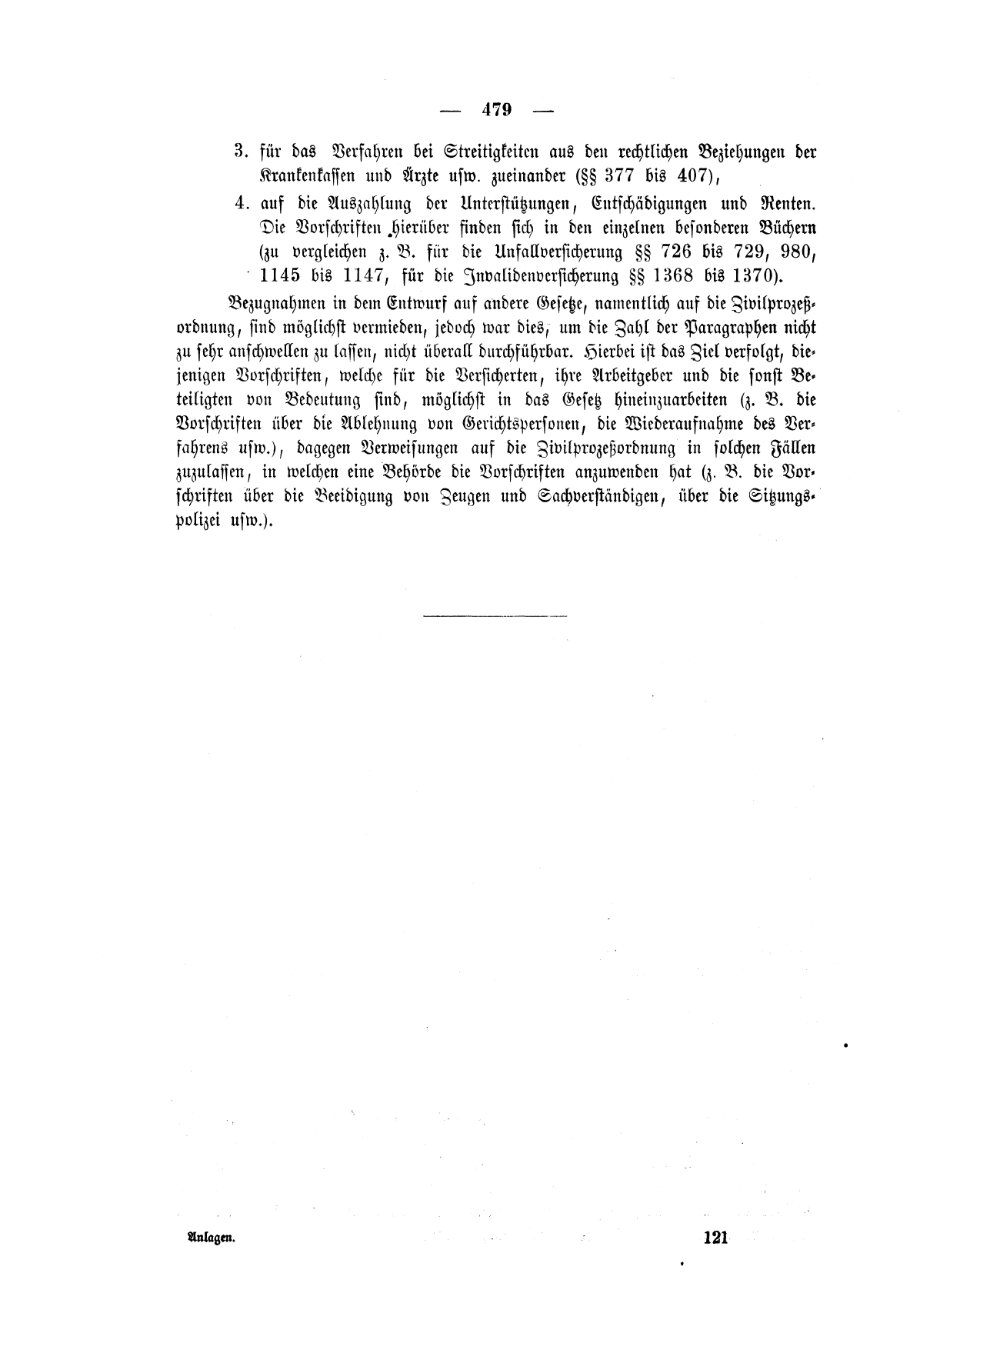 Scan of page 479